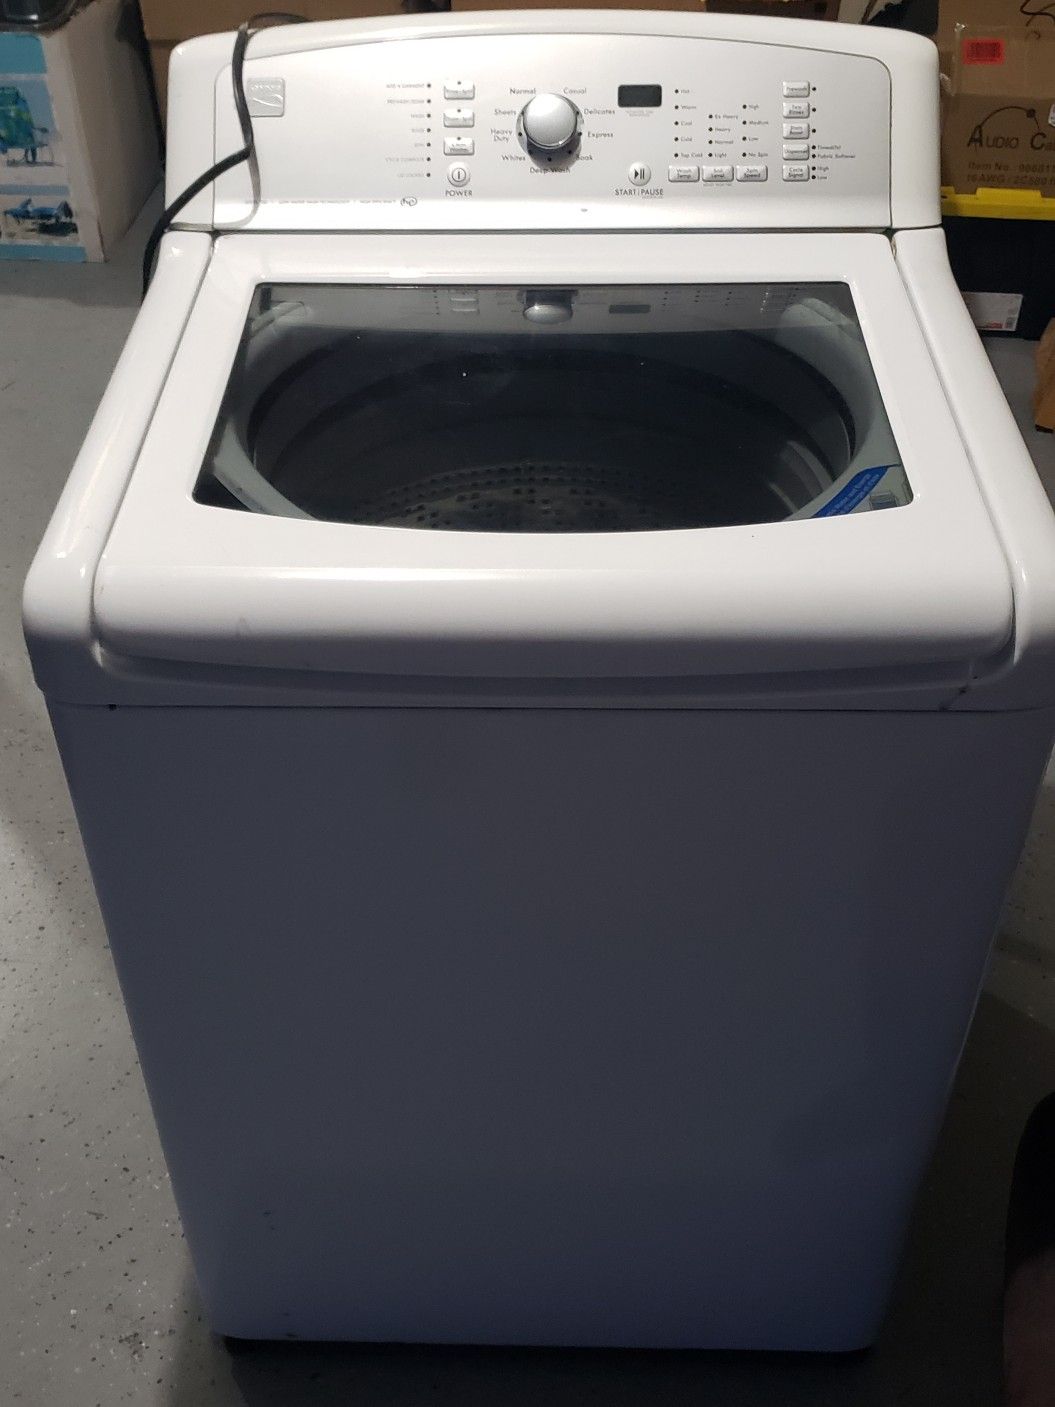 Kenmore 700 series top loading washing machine washer - might need service